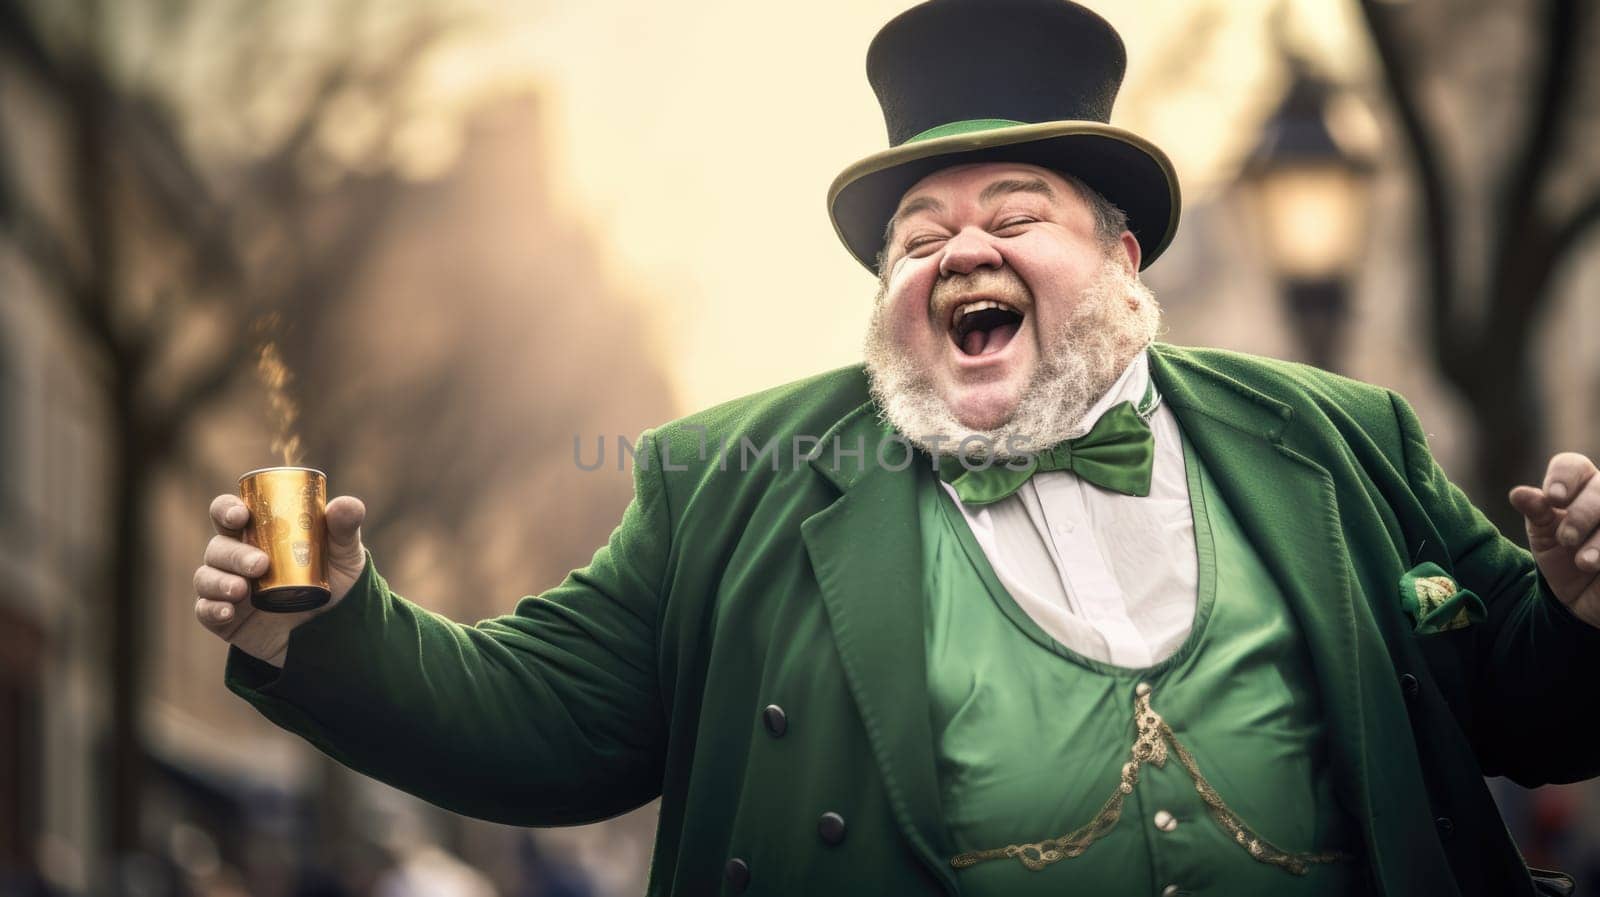 In a merry and vibrant scene, a jolly man dons a bright green suit and hat, his bushy beard adding character as he joyfully holds up a beer mug amidst a festive backdrop of twinkling lights.